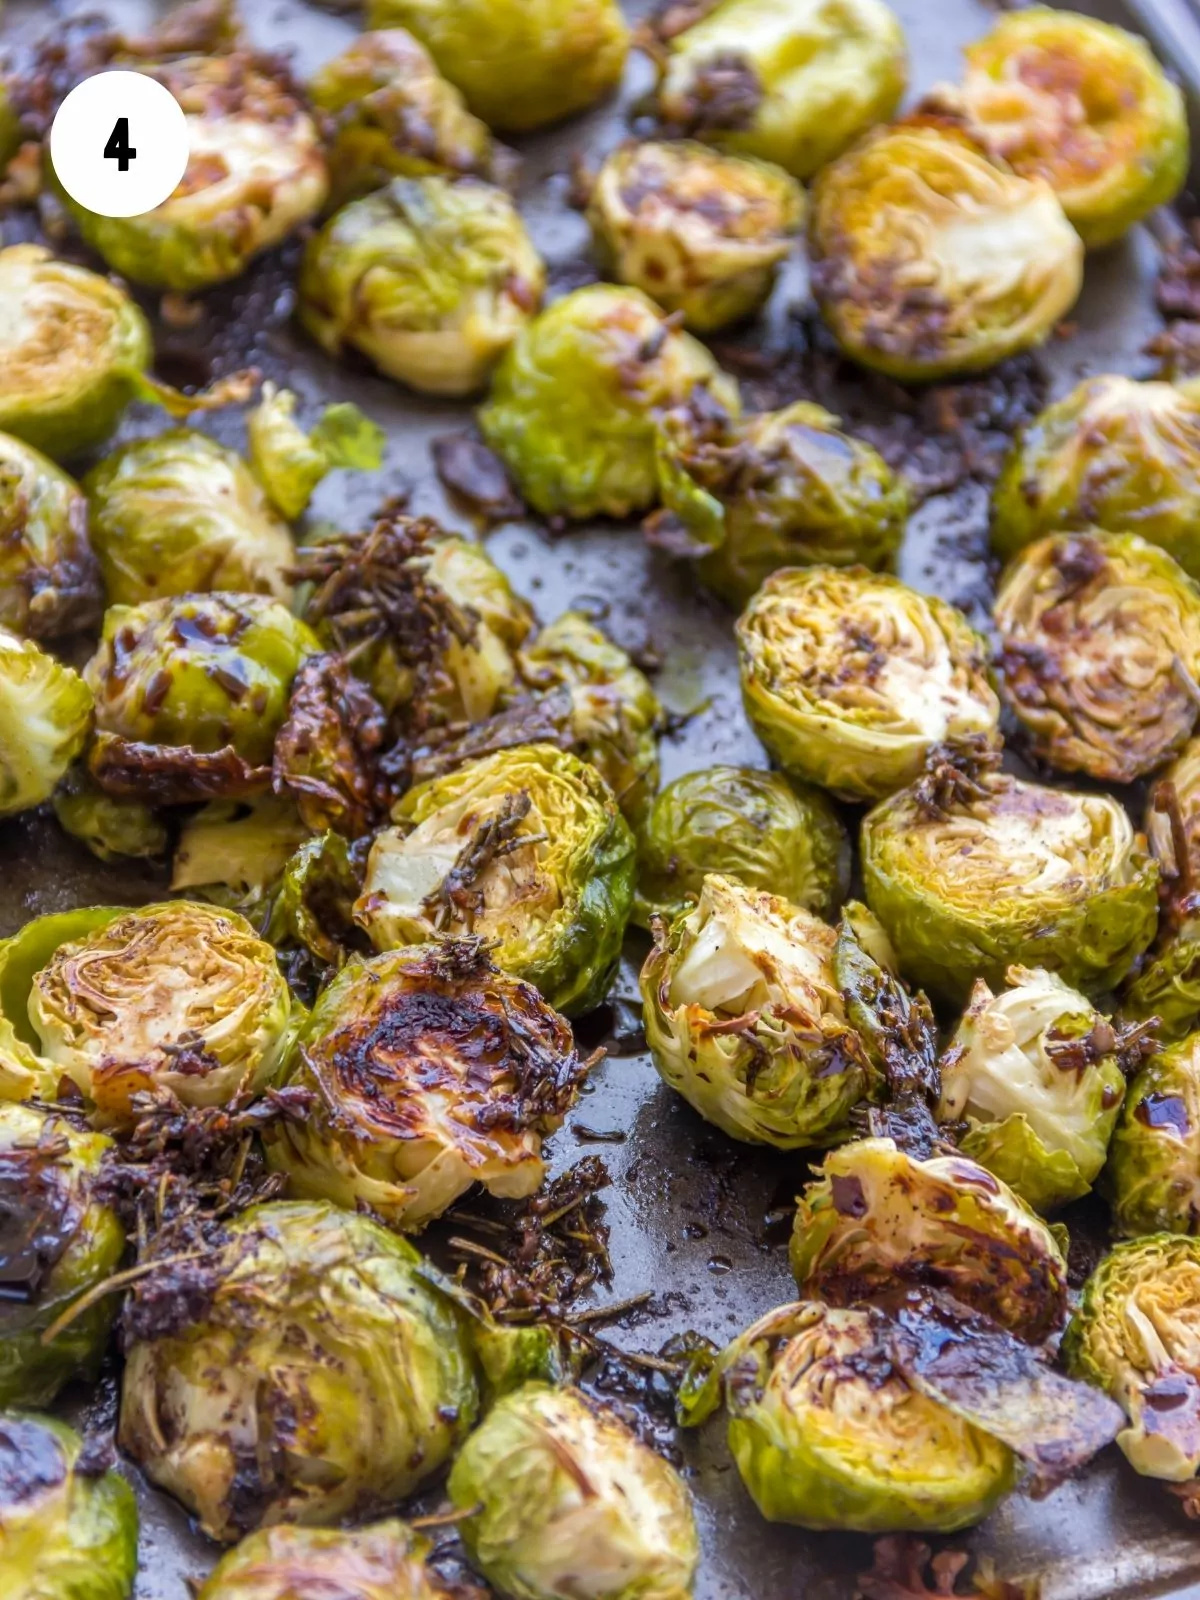 Brussels sprouts roasted on baking tray.